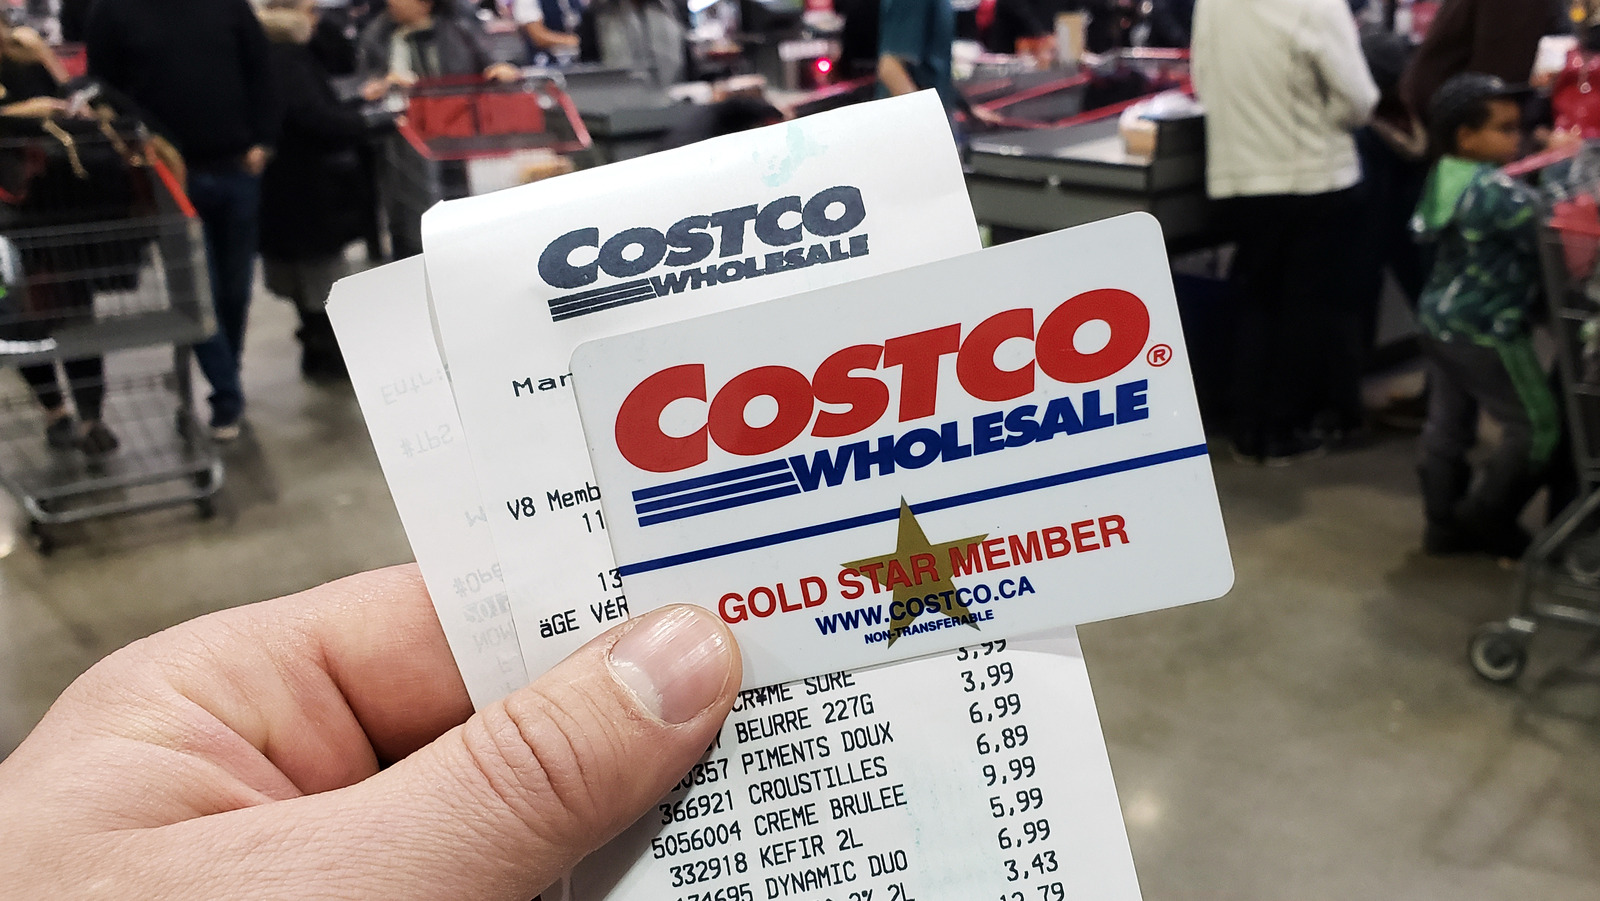 5. "Costco Deals" - A section on the Reddit website where users share current Costco deals and discounts - wide 7